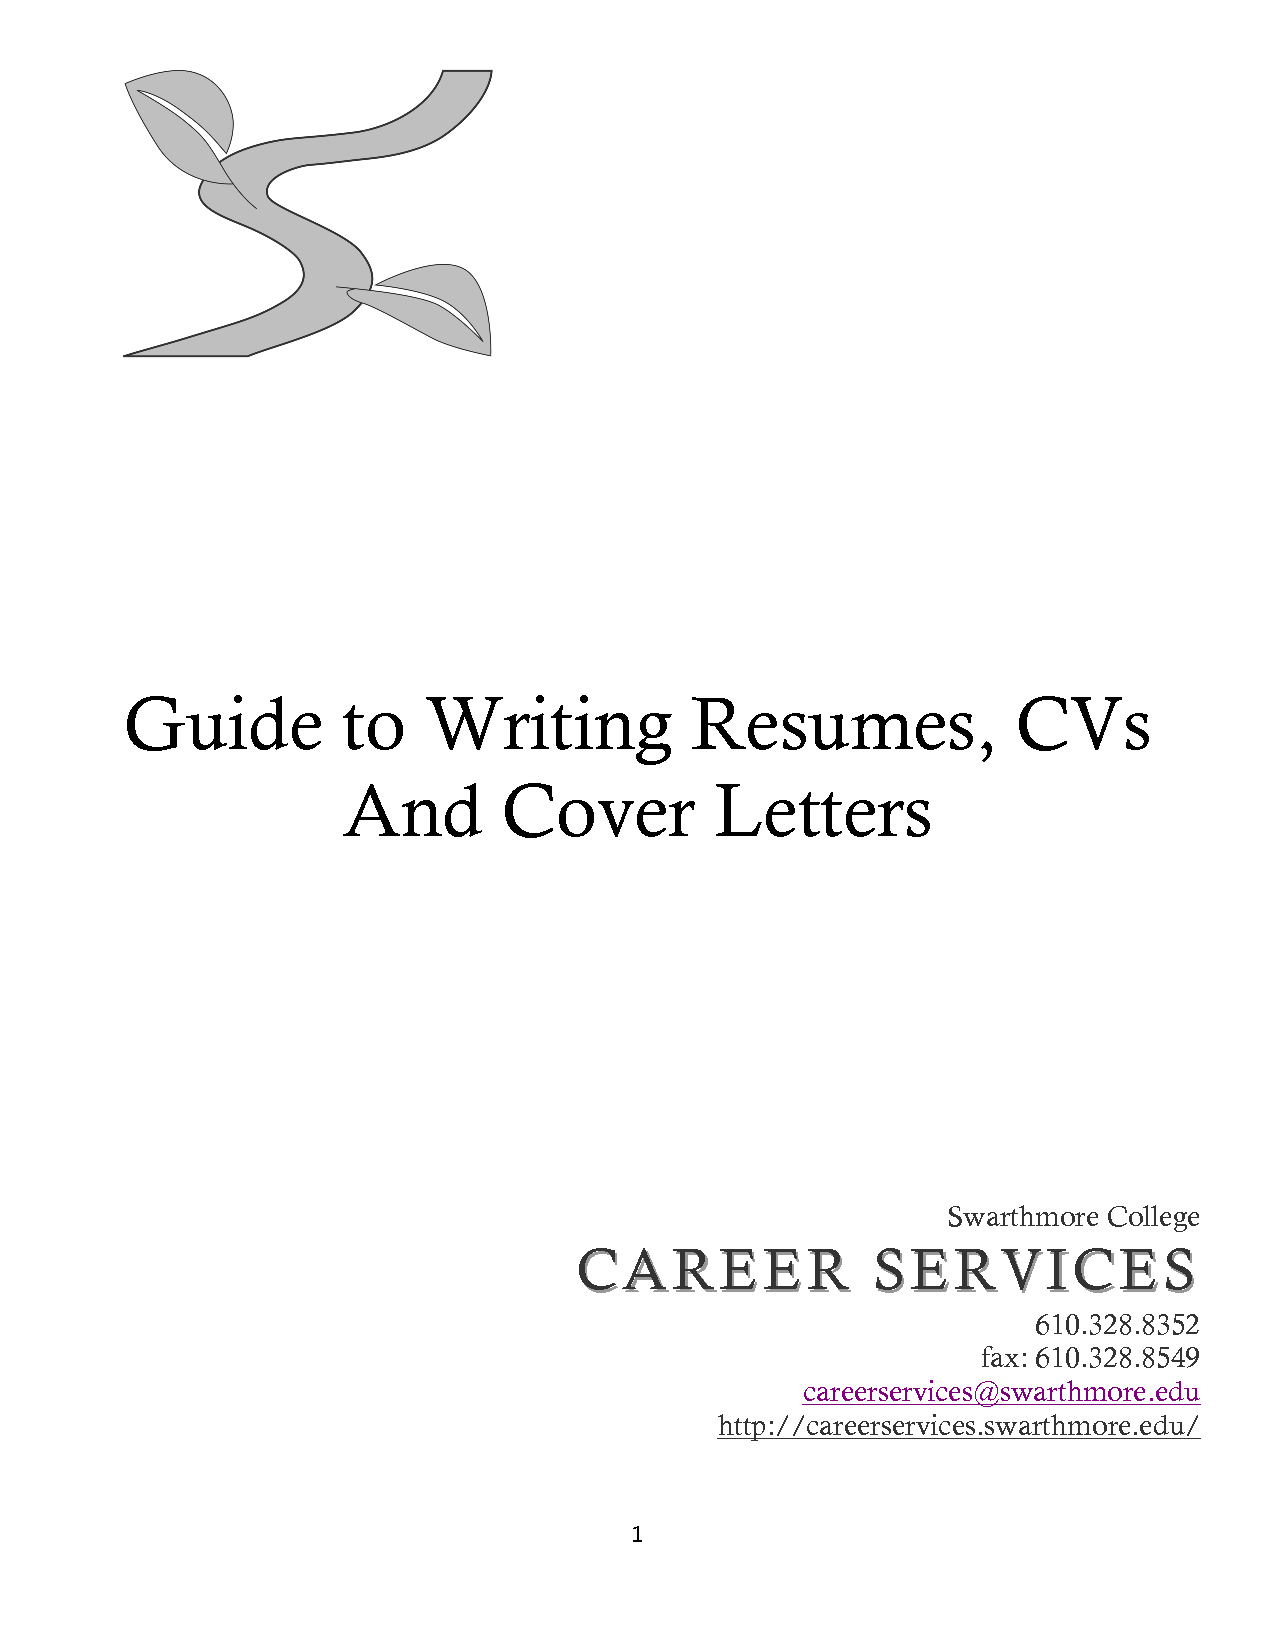 Cover Letter And Resume Clip Art